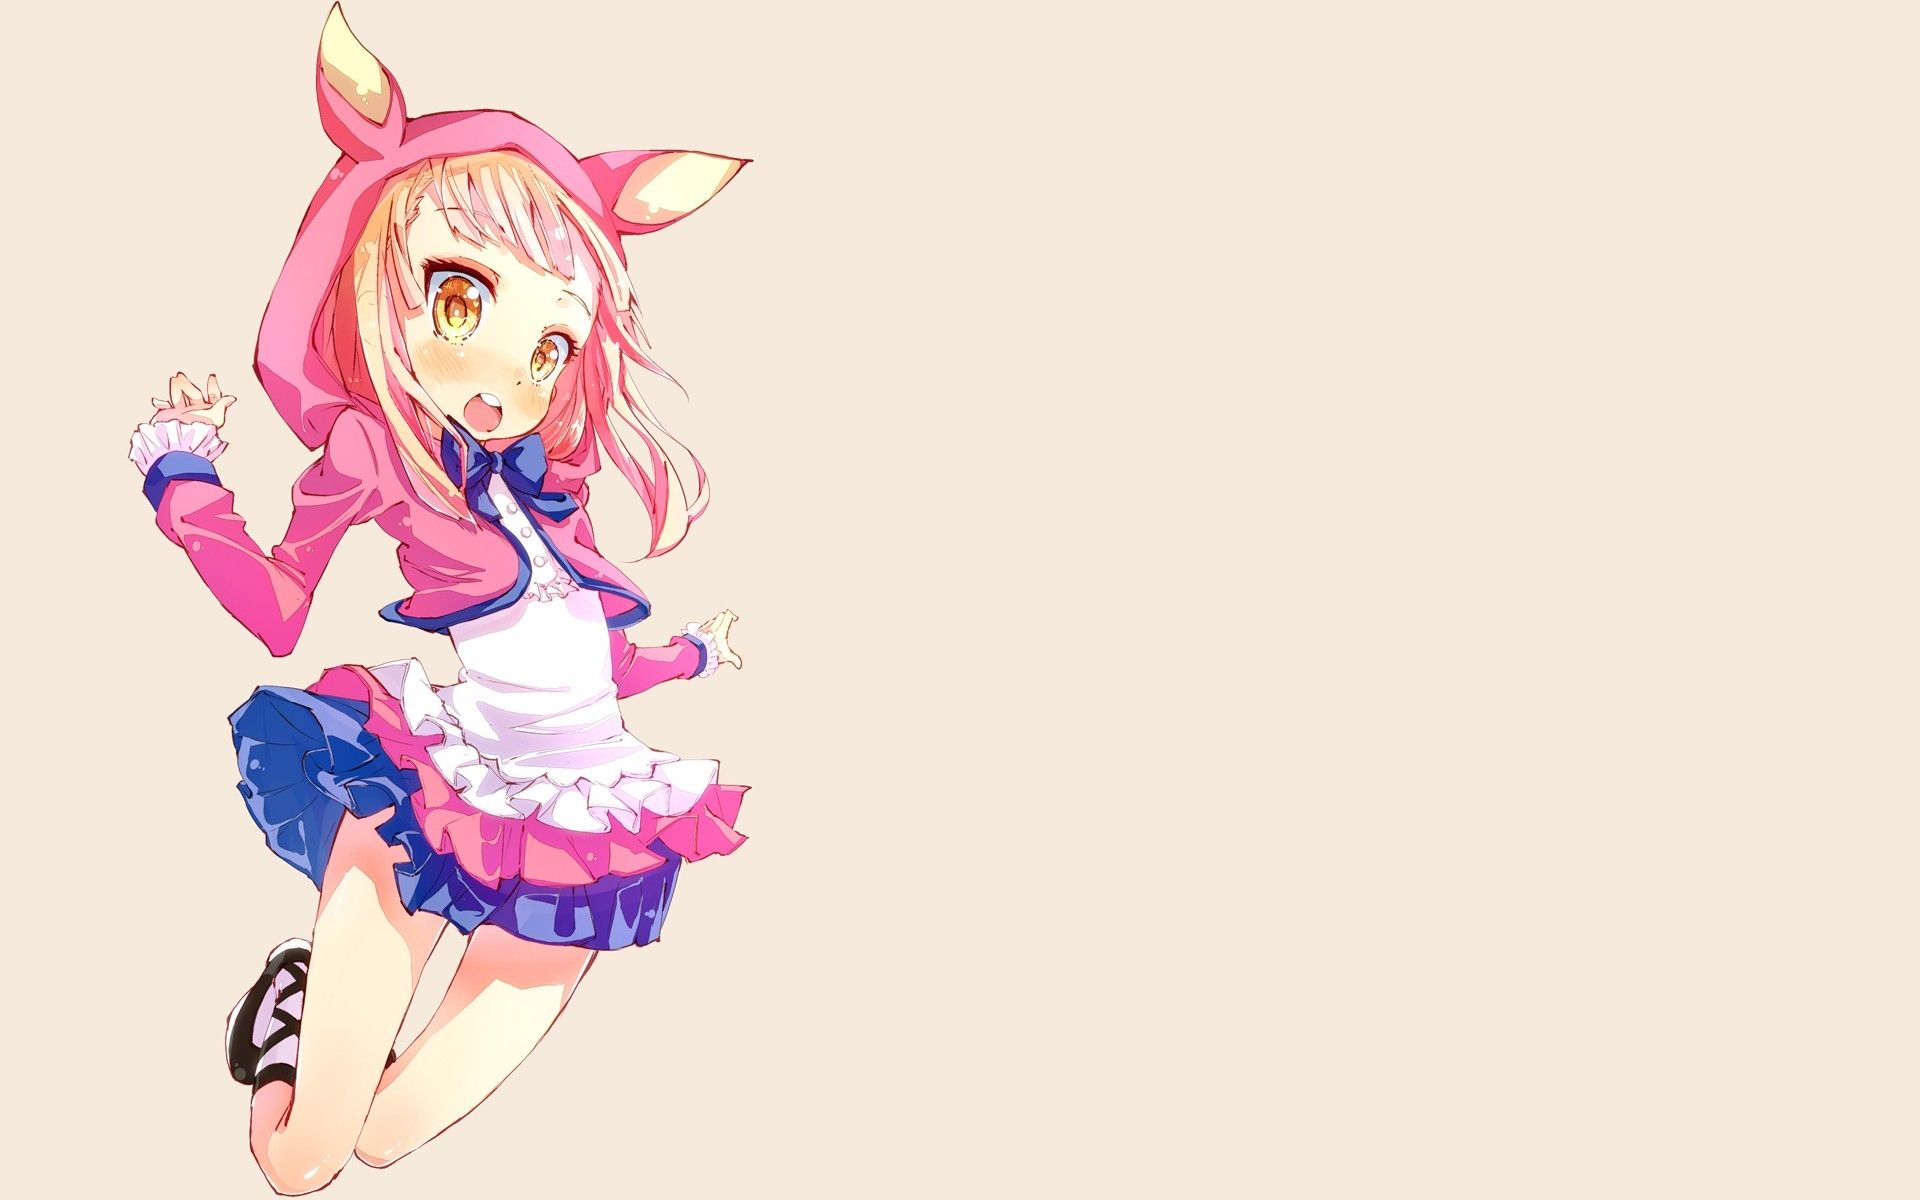 blondes skirts long hair ribbons jumping nekomimi hoodie open mouth simple background anime girls br High Quality Wallpaper, High Definition Wallpaper